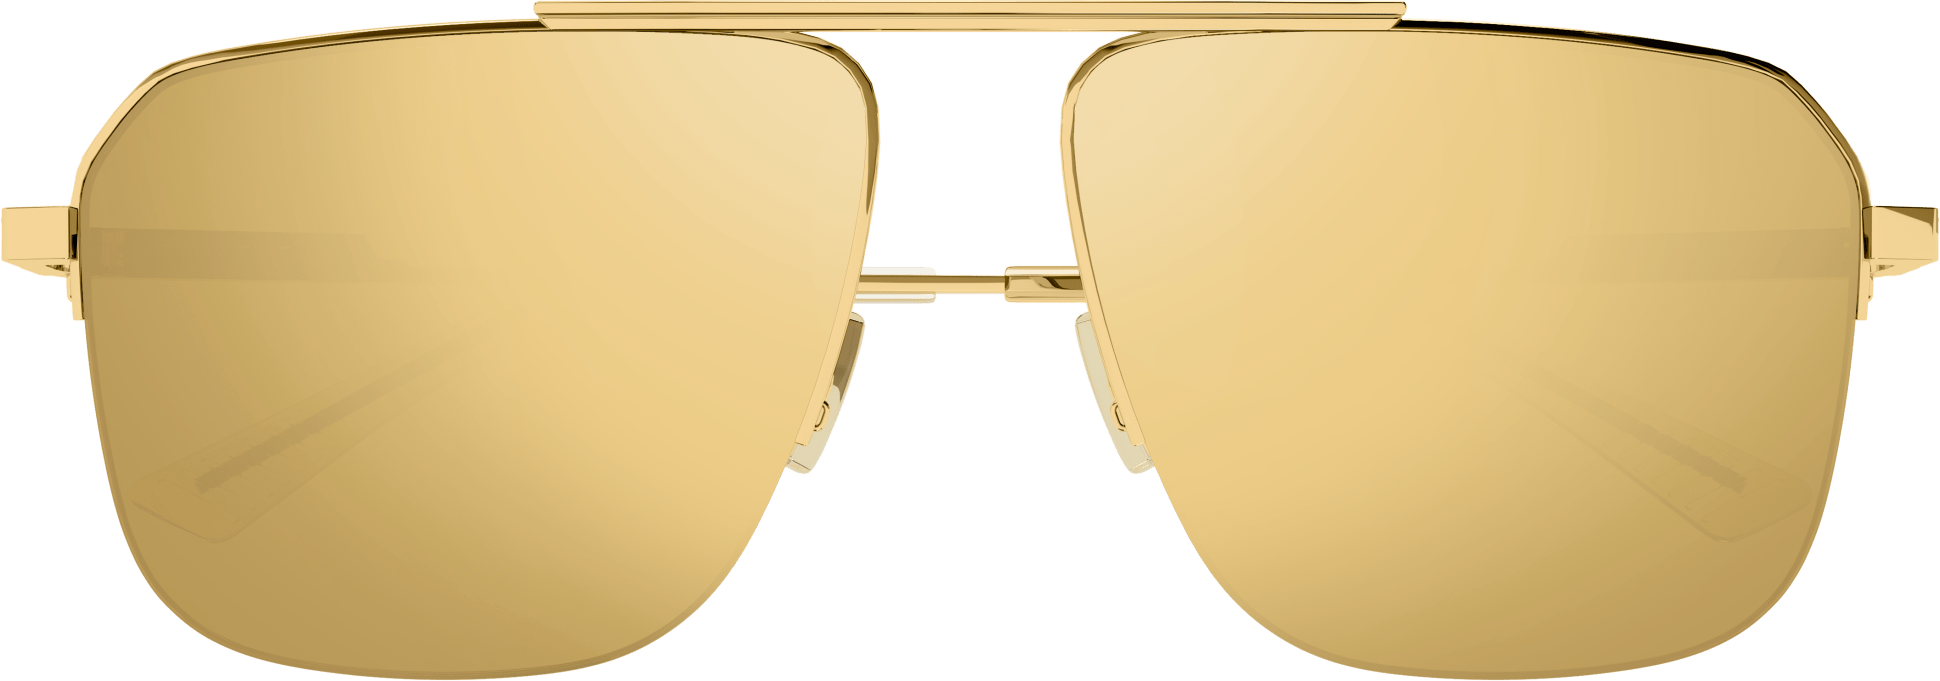 Color_BV1149S-002 - GOLD - GOLD - MIRROR